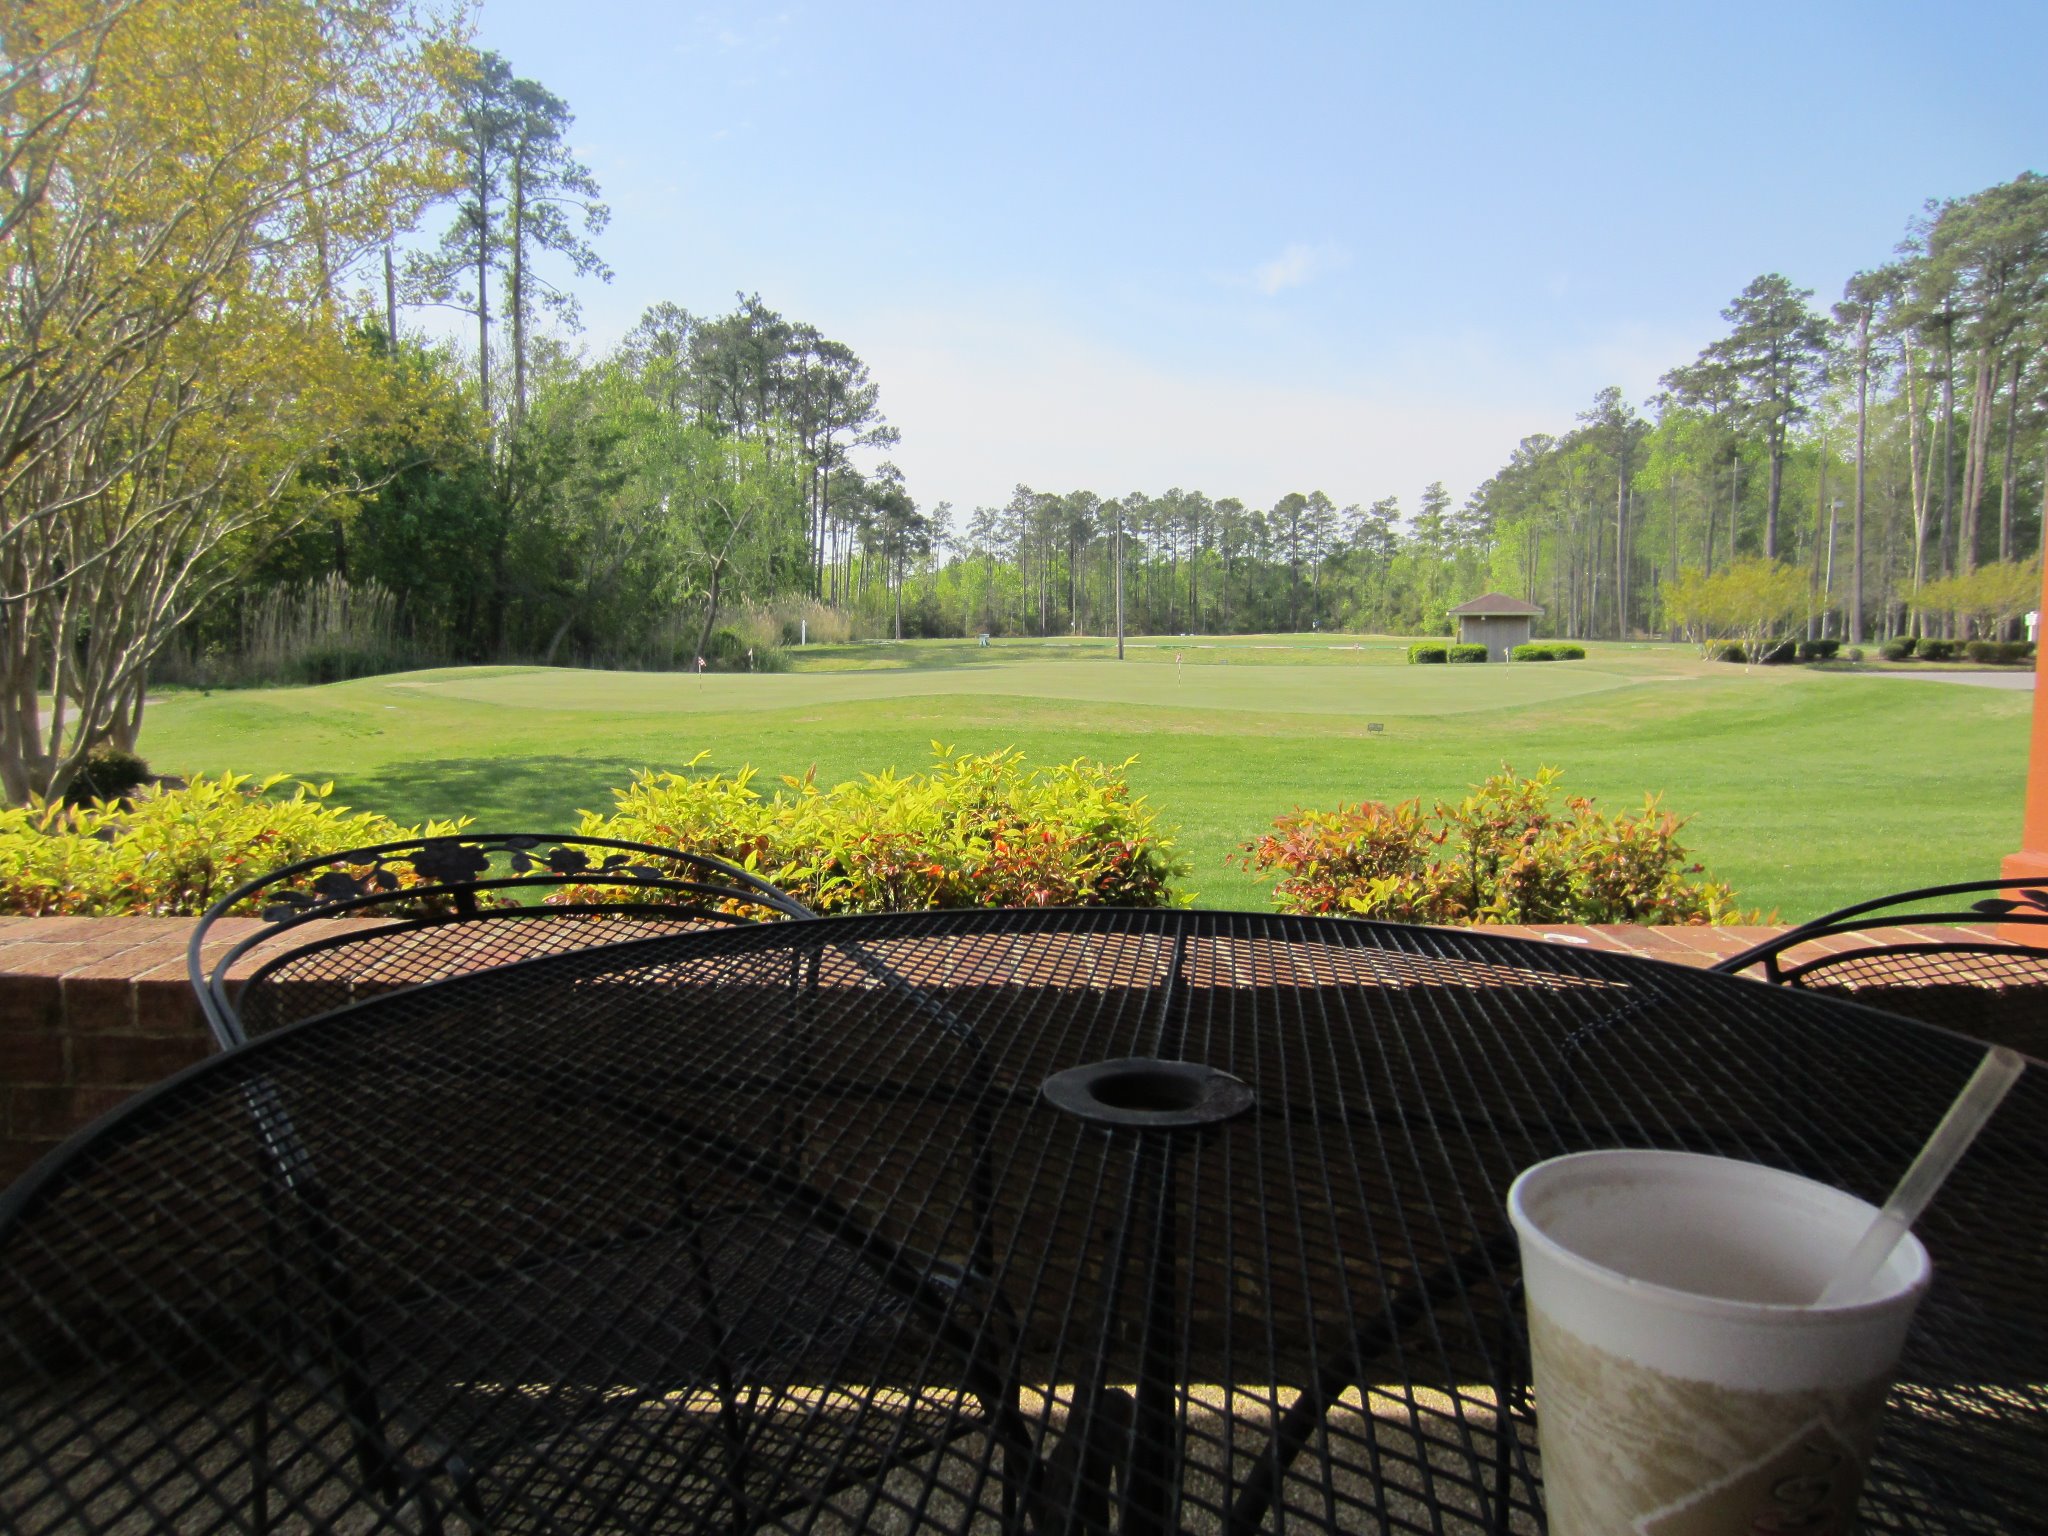 View of the golf course from the clubhouse